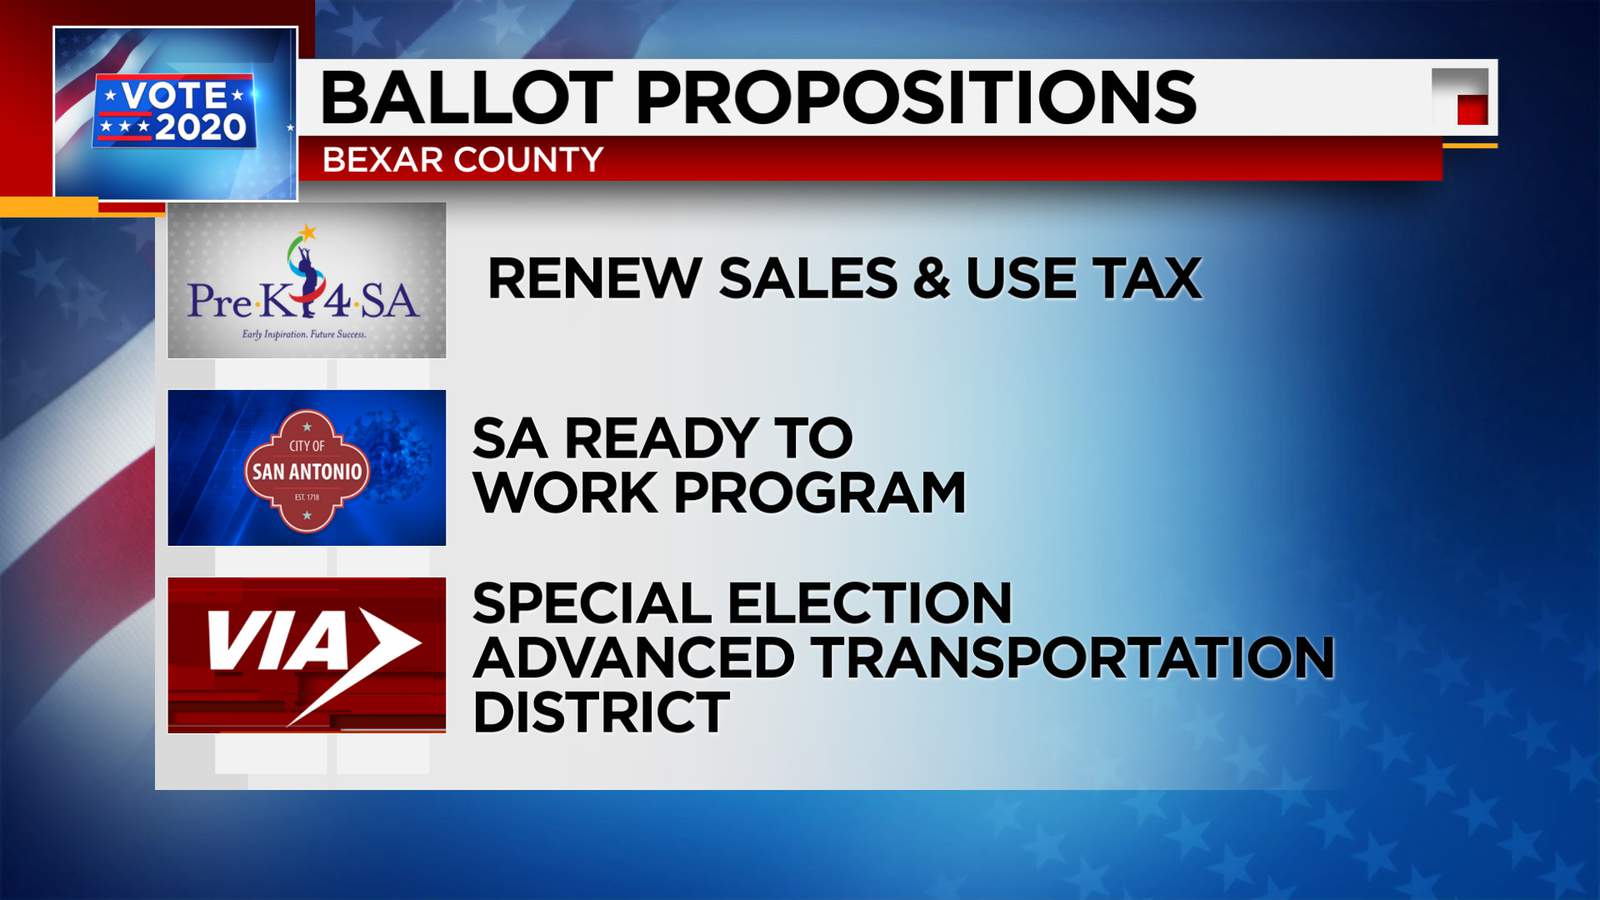 San Antonio voters approve Pre-K 4 SA, workforce training propositions and VIA transportation proposal